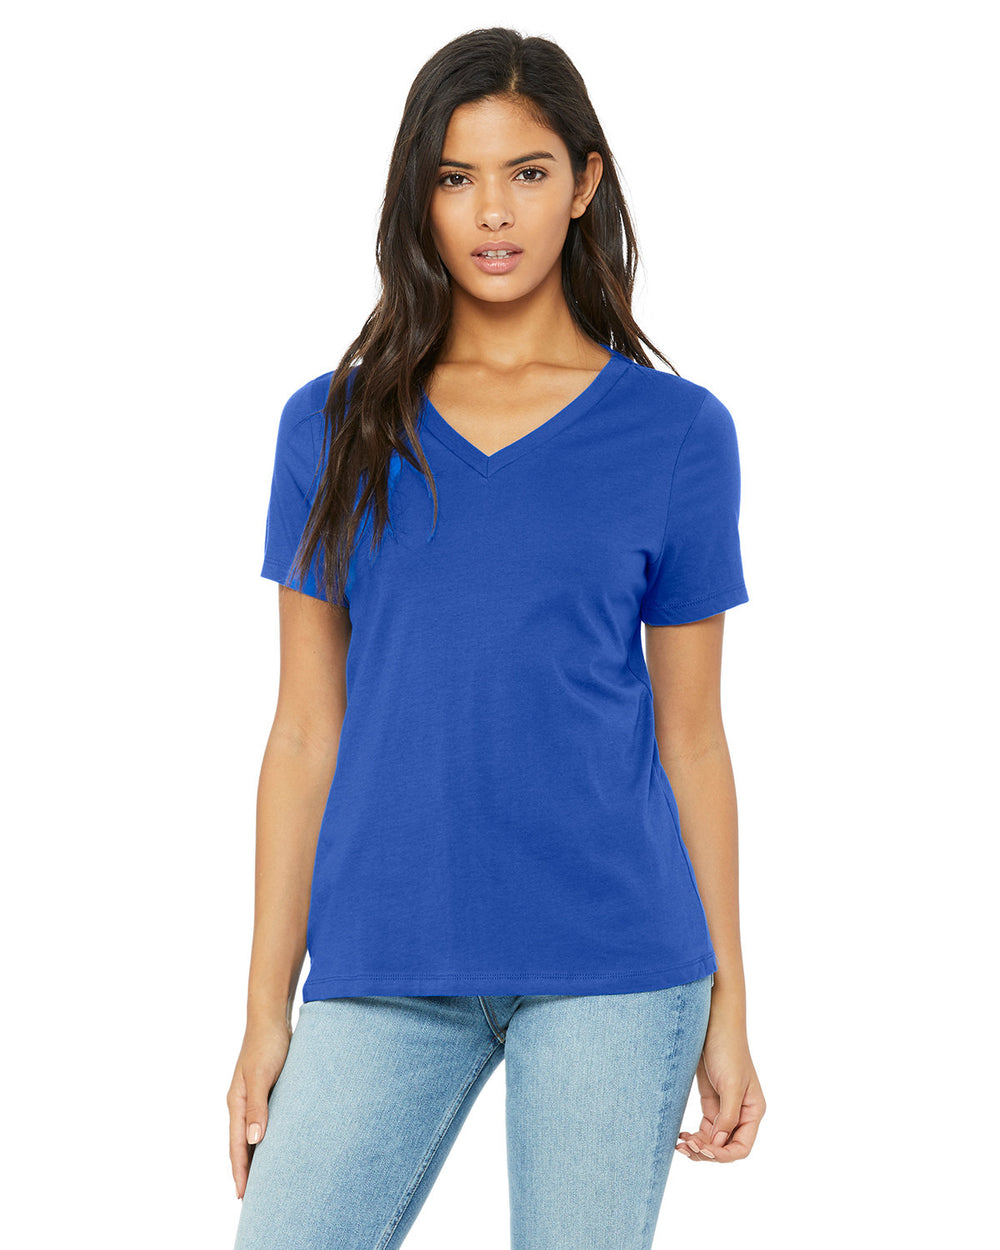 Bella + Canvas - Ladies Relaxed Jersey V-Neck T-Shirt - 6405